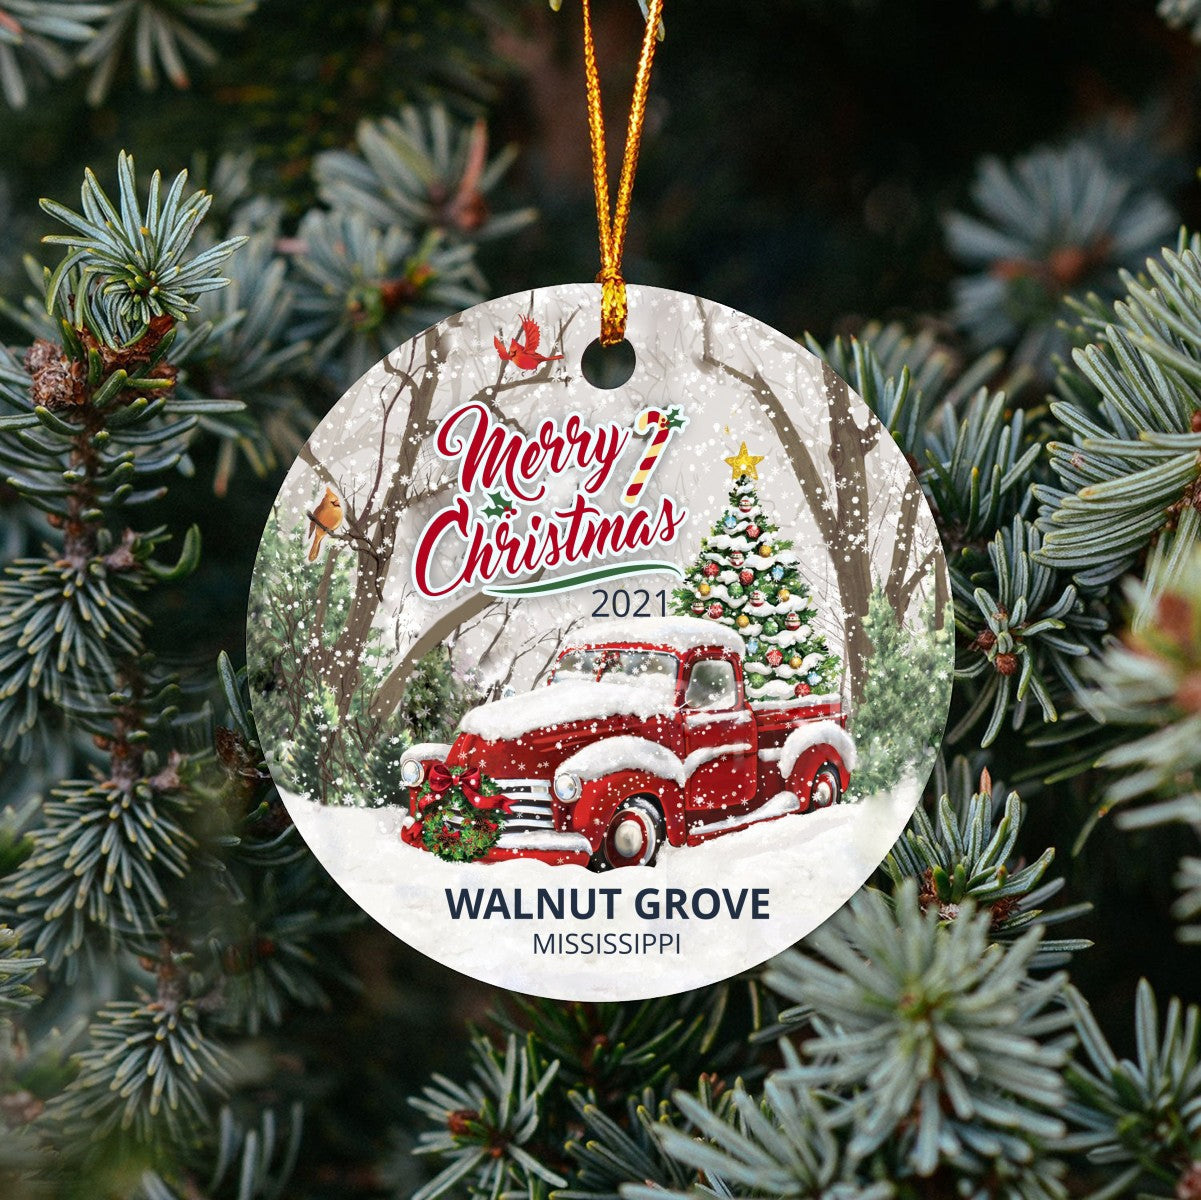 Christmas Tree Ornaments Walnut Grove - Ornament With Name City, State Walnut Grove Mississippi MS Ornament - Red Truck Xmas Ornaments 3'' Plastic Gift For Family, Friend And Housewarming